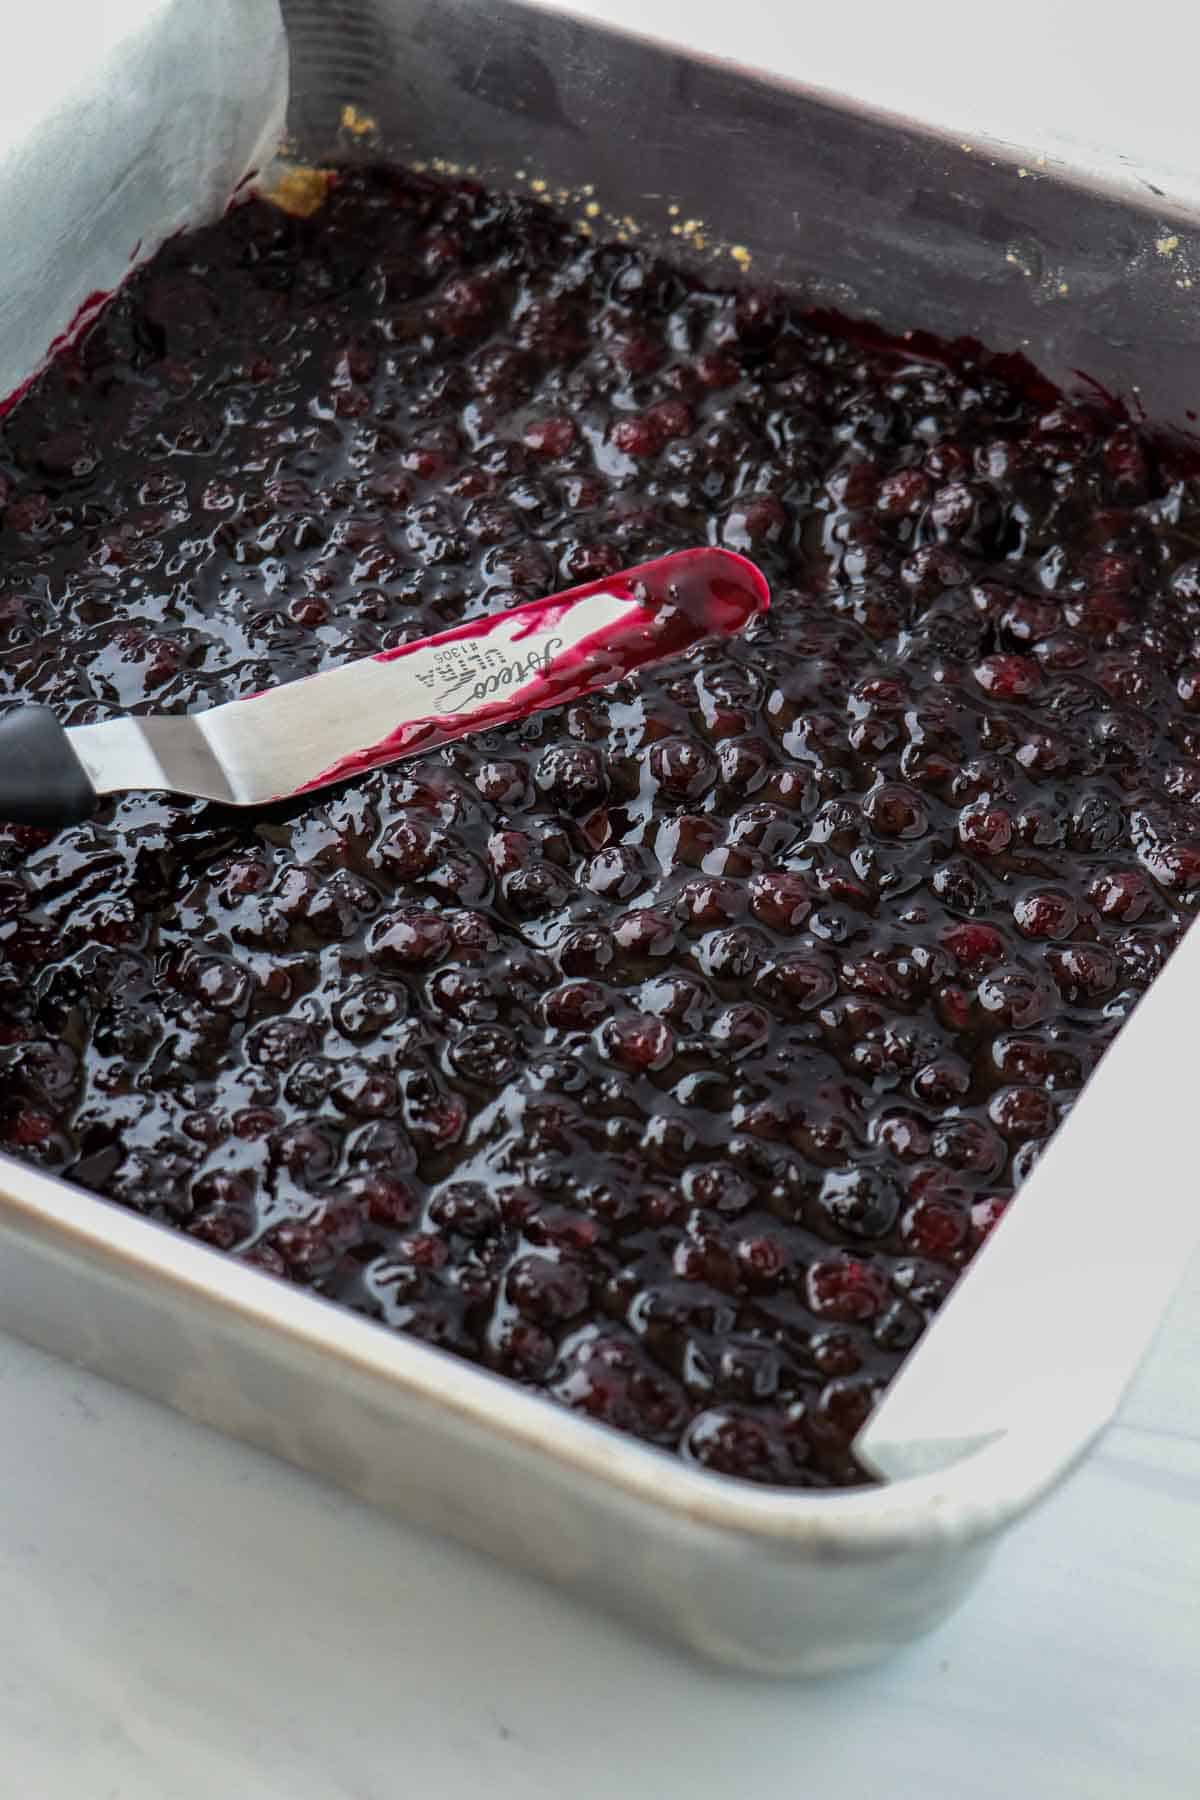 Blueberry filling being spread in a square baking pan.